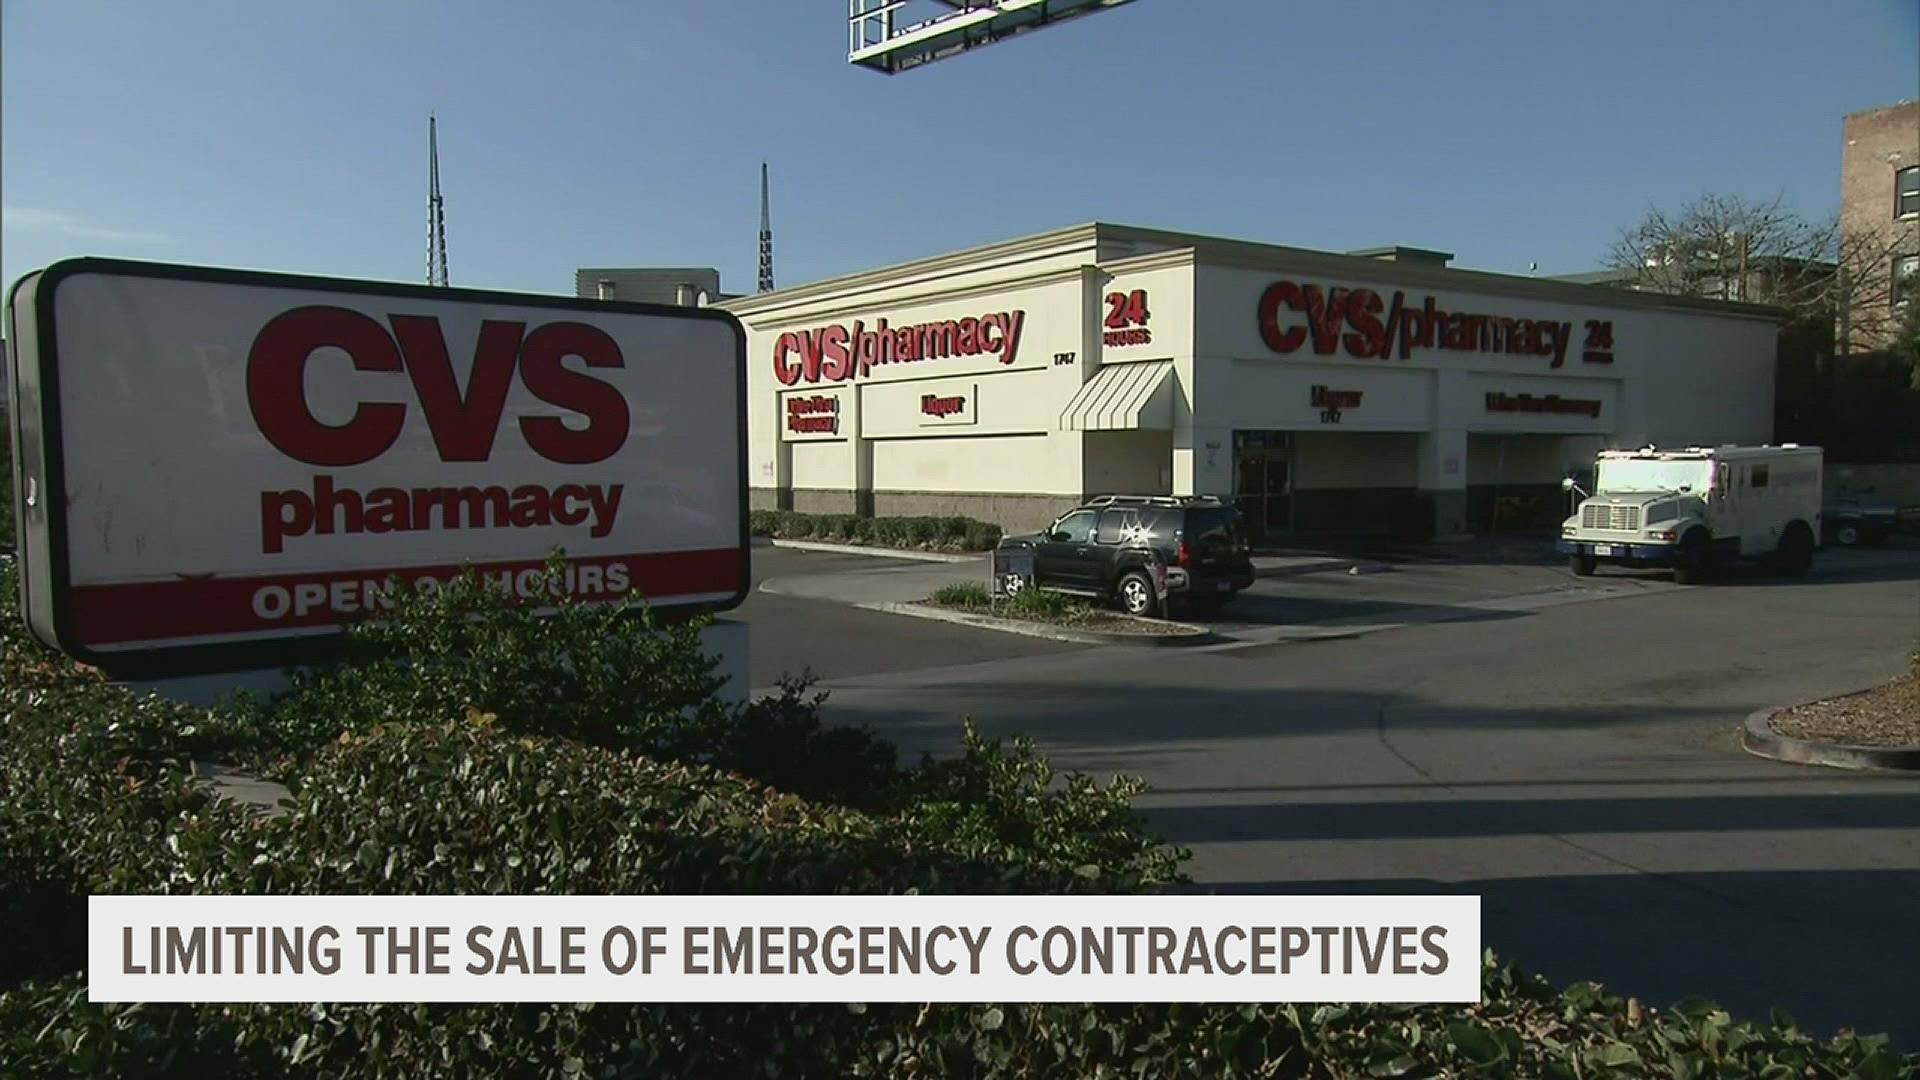 Some chains, like CVS and Rite-Aid, are limiting the number of emergency contraceptive products that individual customers can buy, citing a spike in demand.